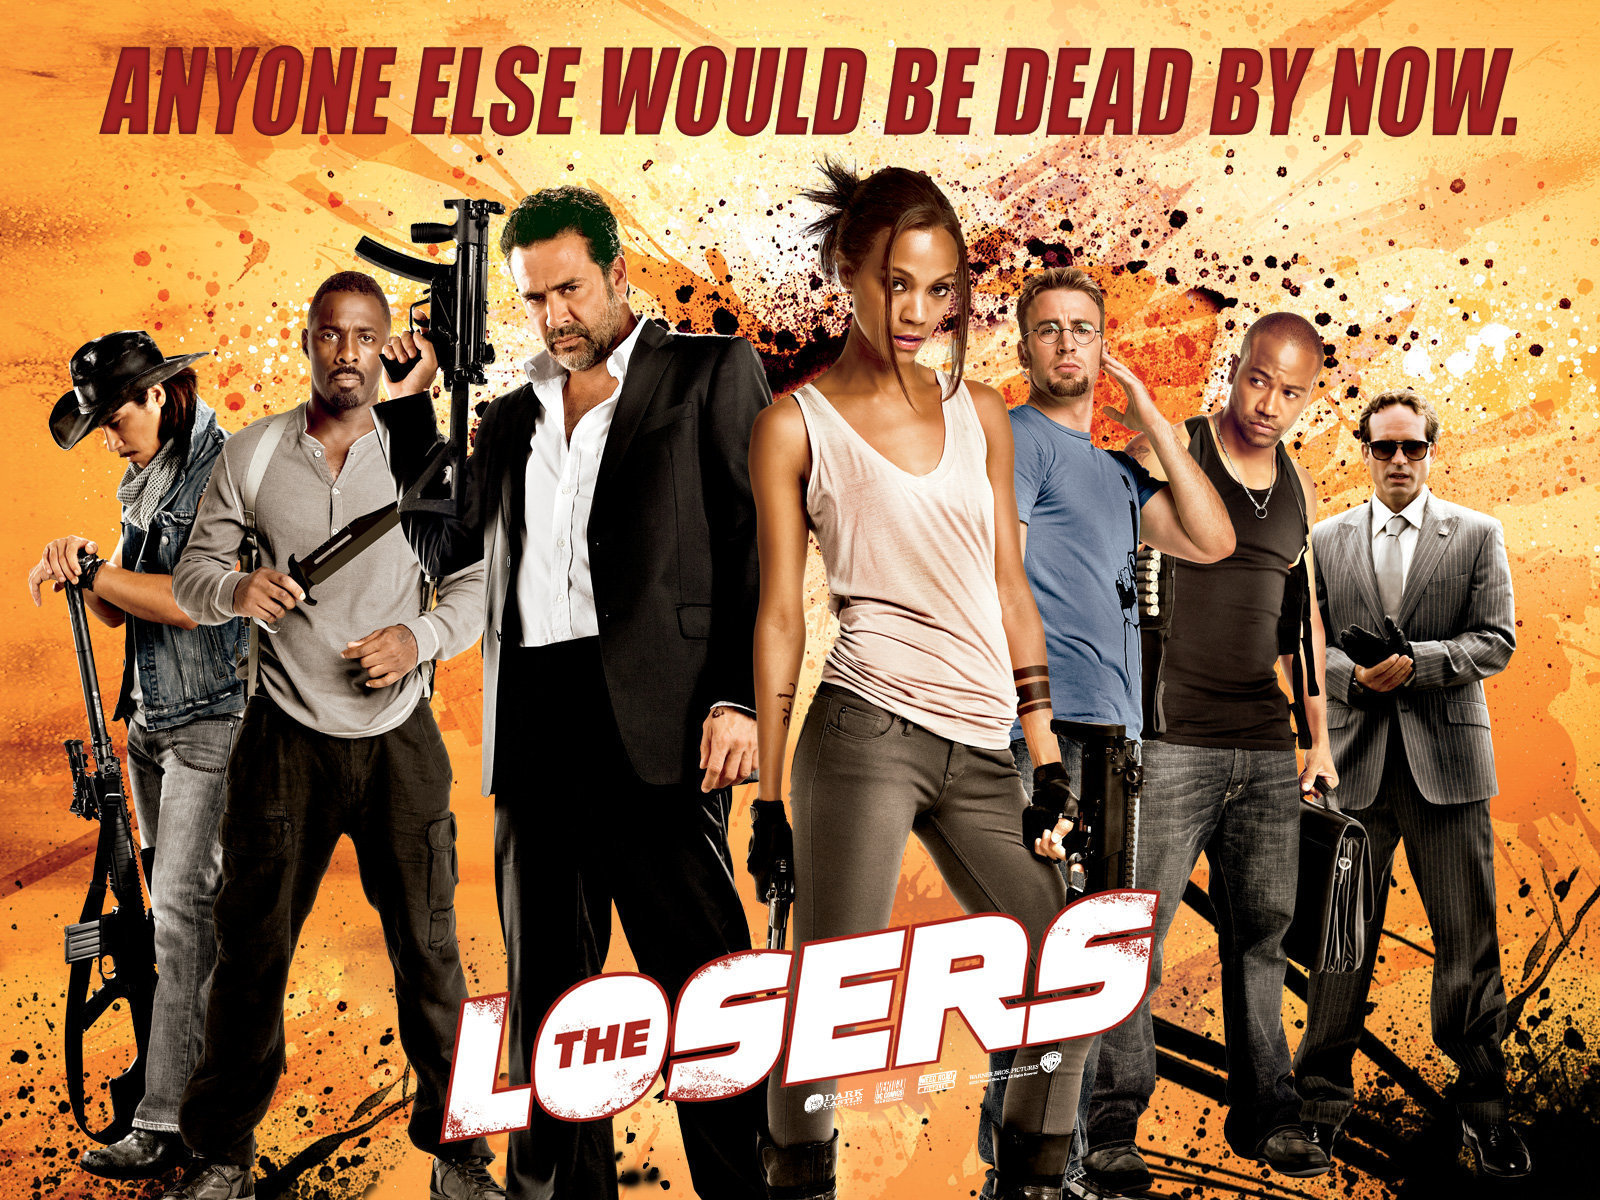 The Losers Image HD Wallpaper And Background Photos